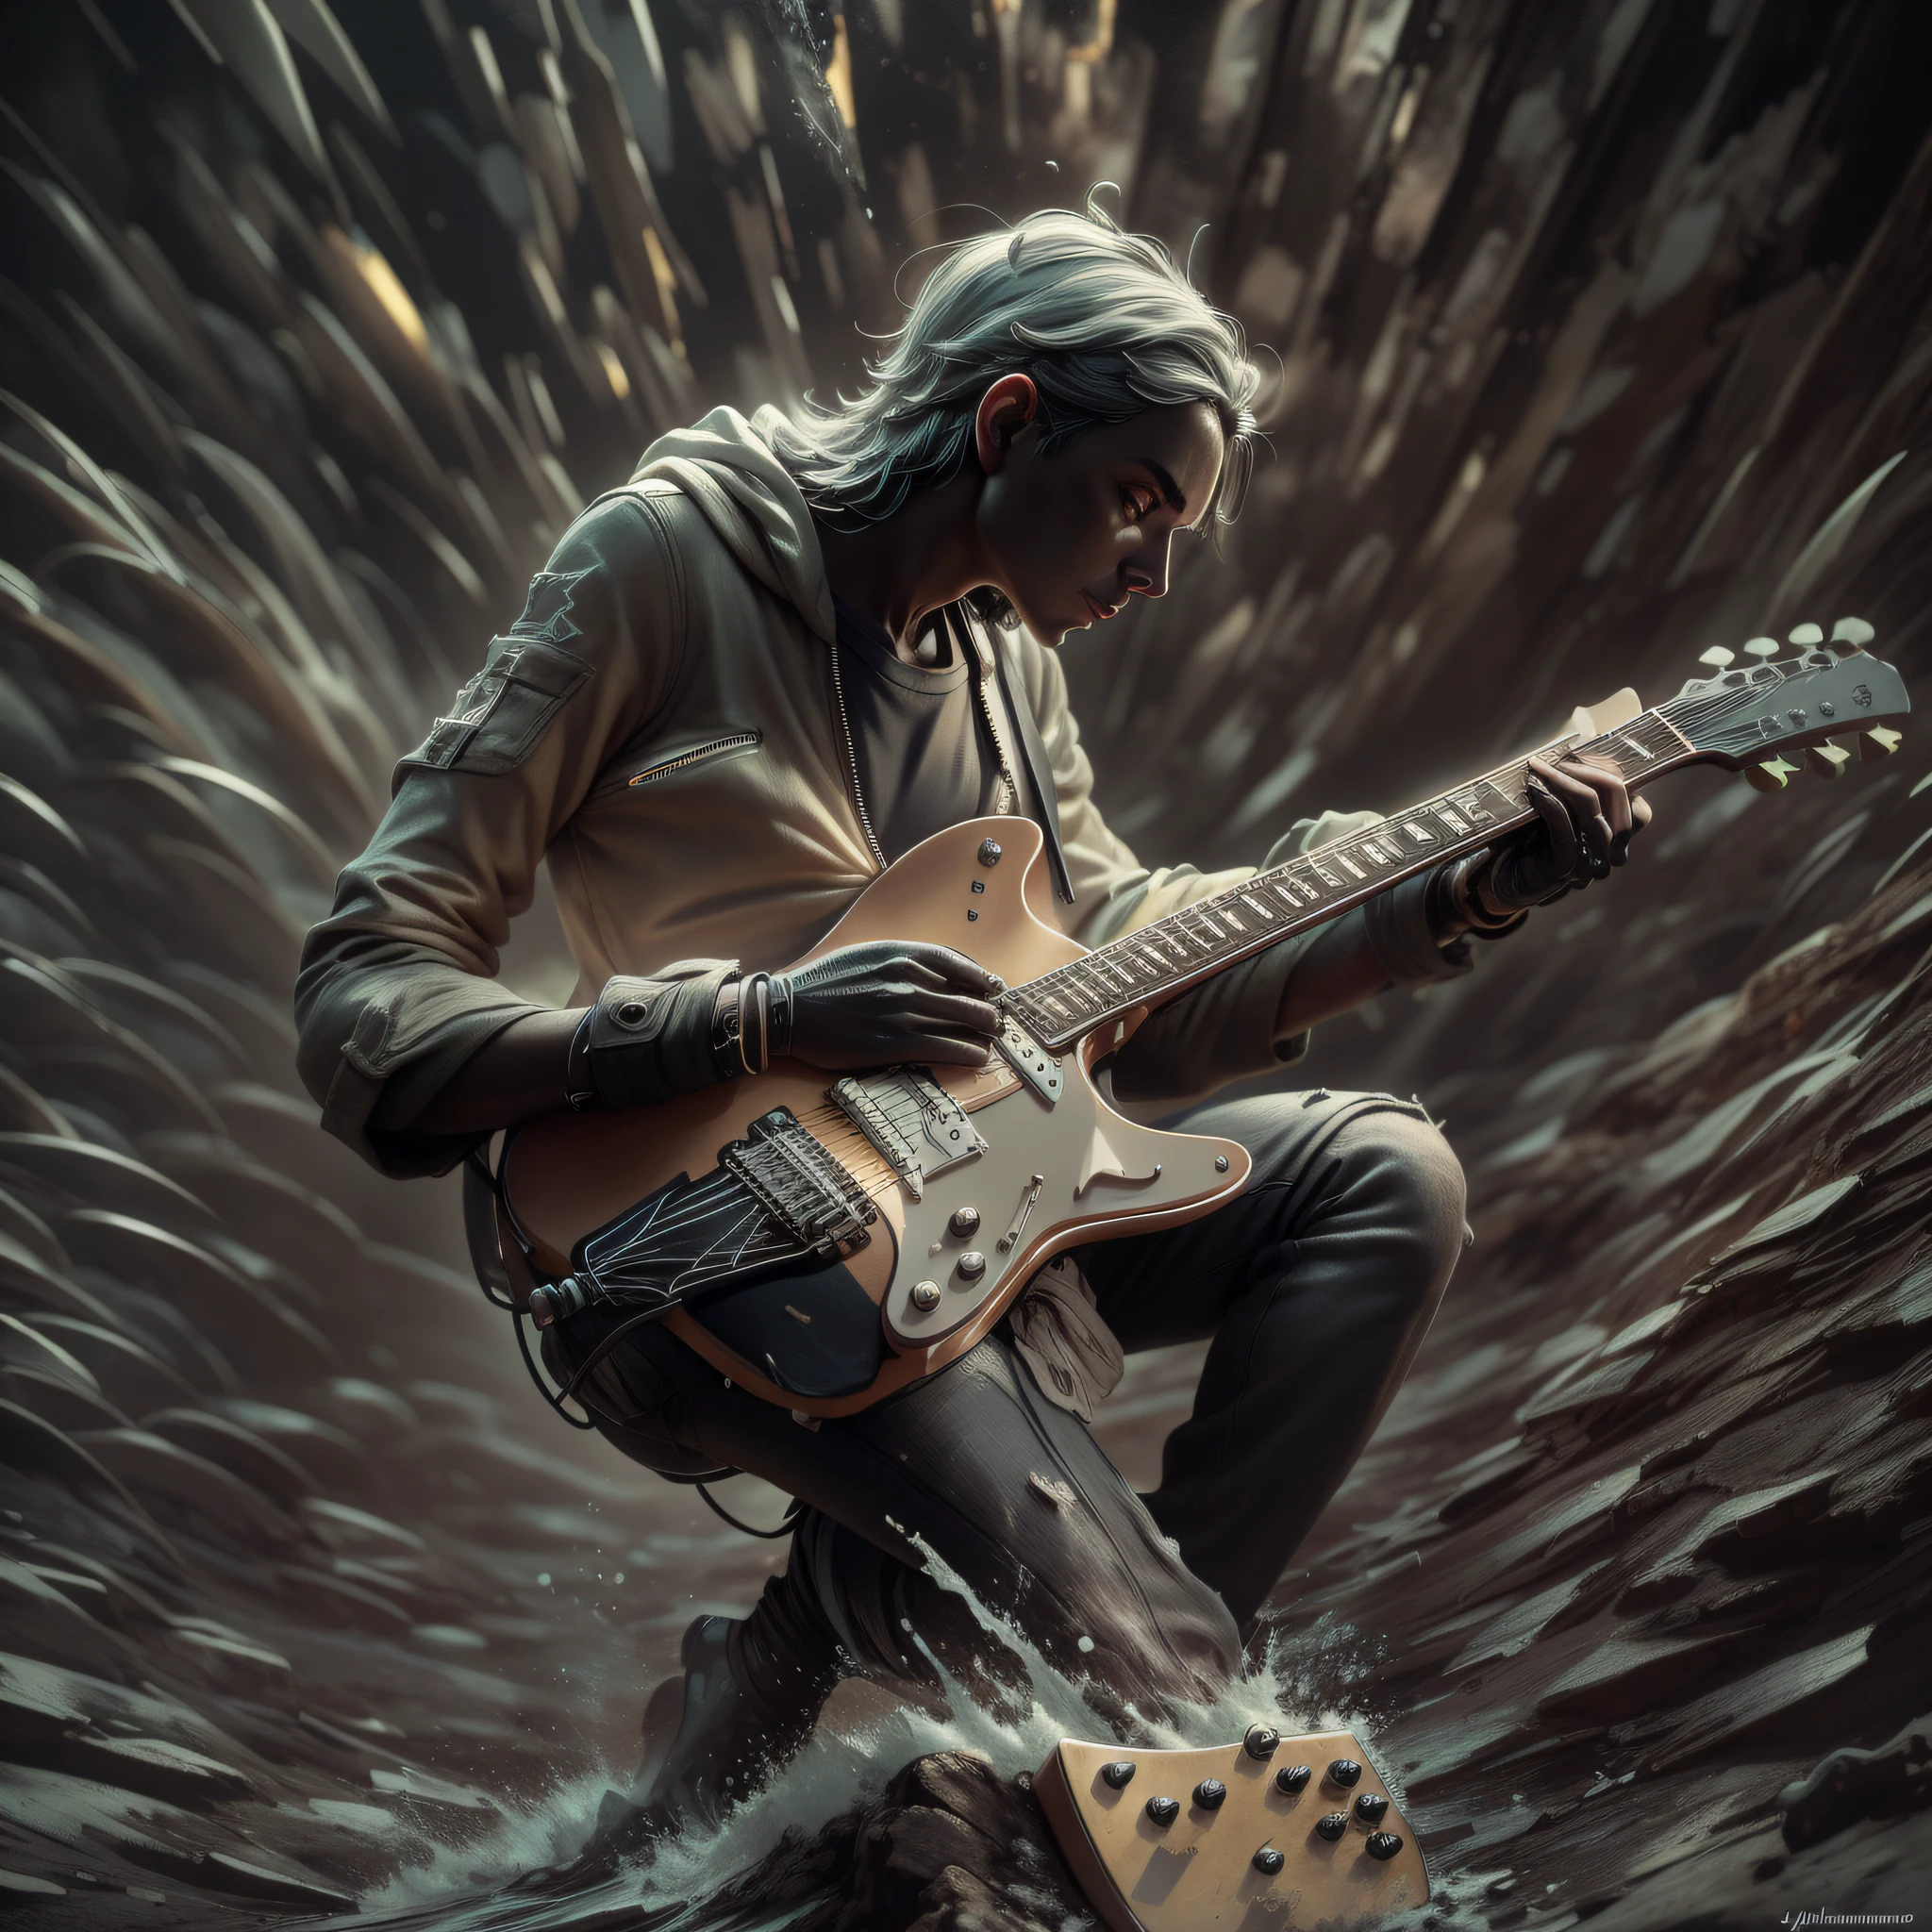 a highly detailed 3D light sculpture from the art style Joan Fontcuberta depicting a centered swallowing black hole guitar. Motor Unreal 5, cinemactic, Low-angle photography, motion blur, Depth of field, dust, Pebbles and mud. Arte Splash, dripping paint. Perfect color classification. Influenced by karel Appel and jeremy mann, A dramatic and menacing scene, 超detailded, Beautiful, insane details, details Intricate, Editorial Photography, shot on 50mm lens, Depth of field, Tilt Blur, shutter-speed 1/1000, F/22. light mapping, Ultrabrilhante |